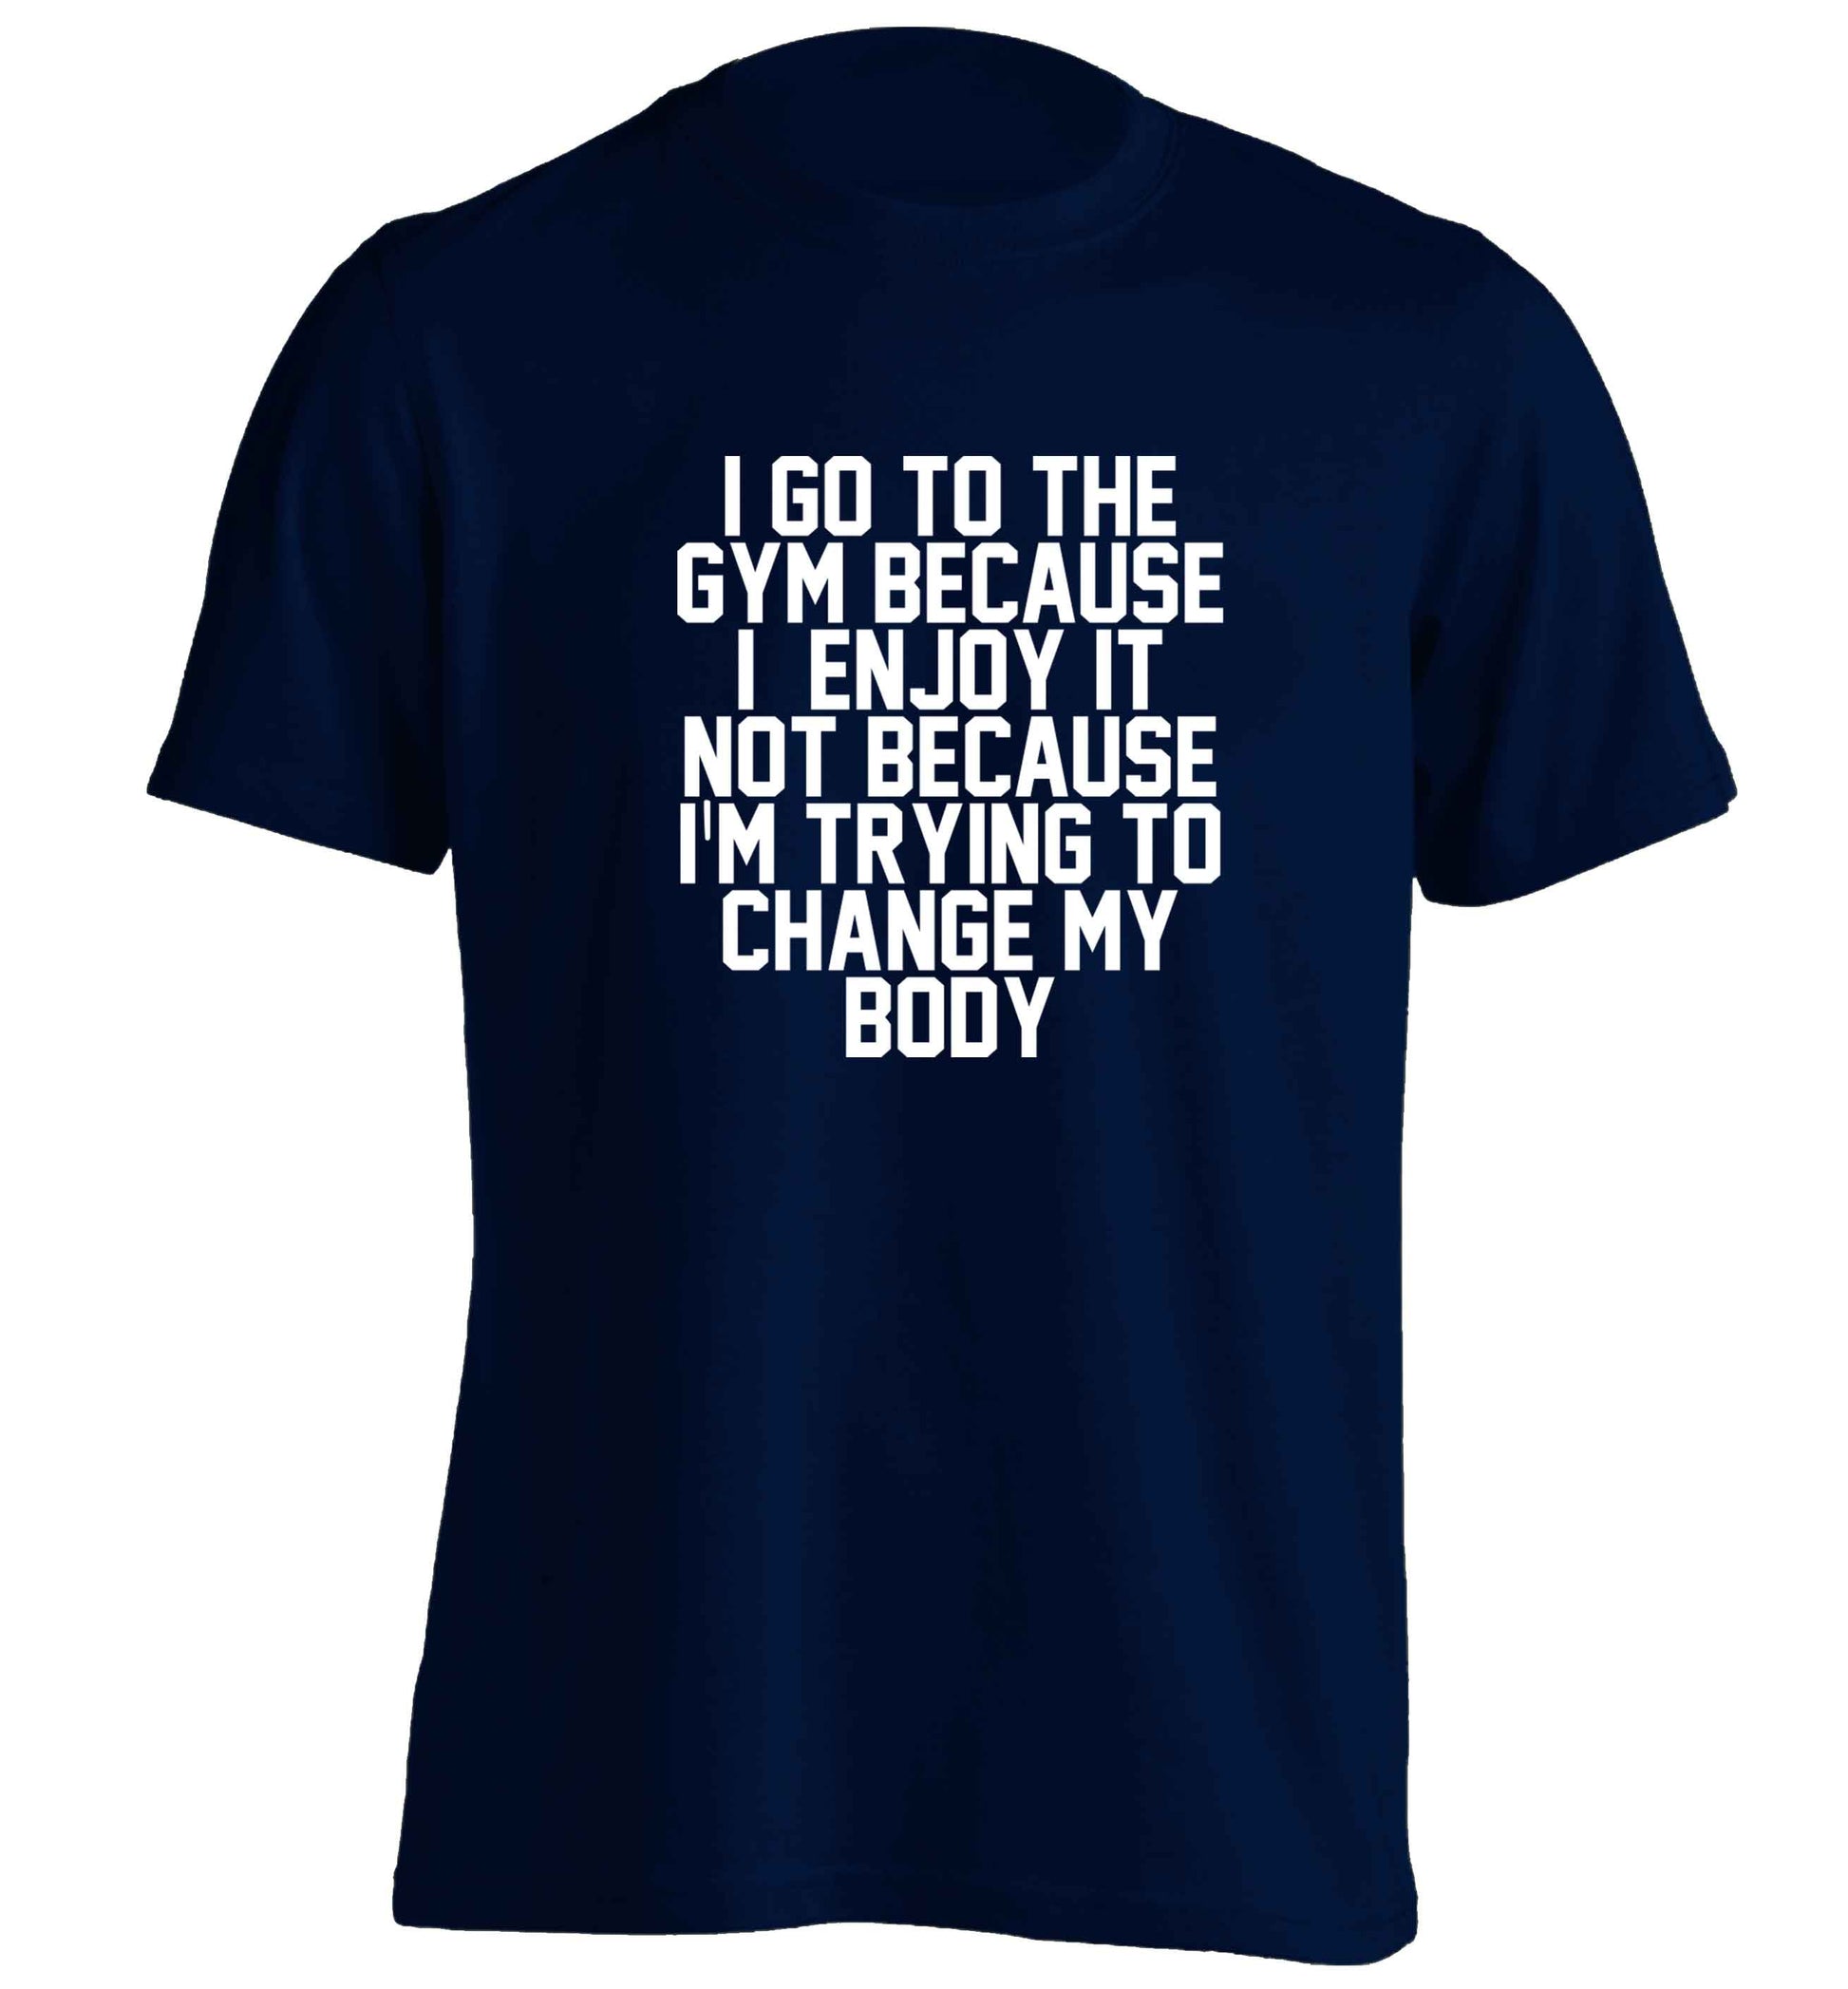 I go to the gym because I enjoy it not because I'm trying to change my body adults unisex navy Tshirt 2XL